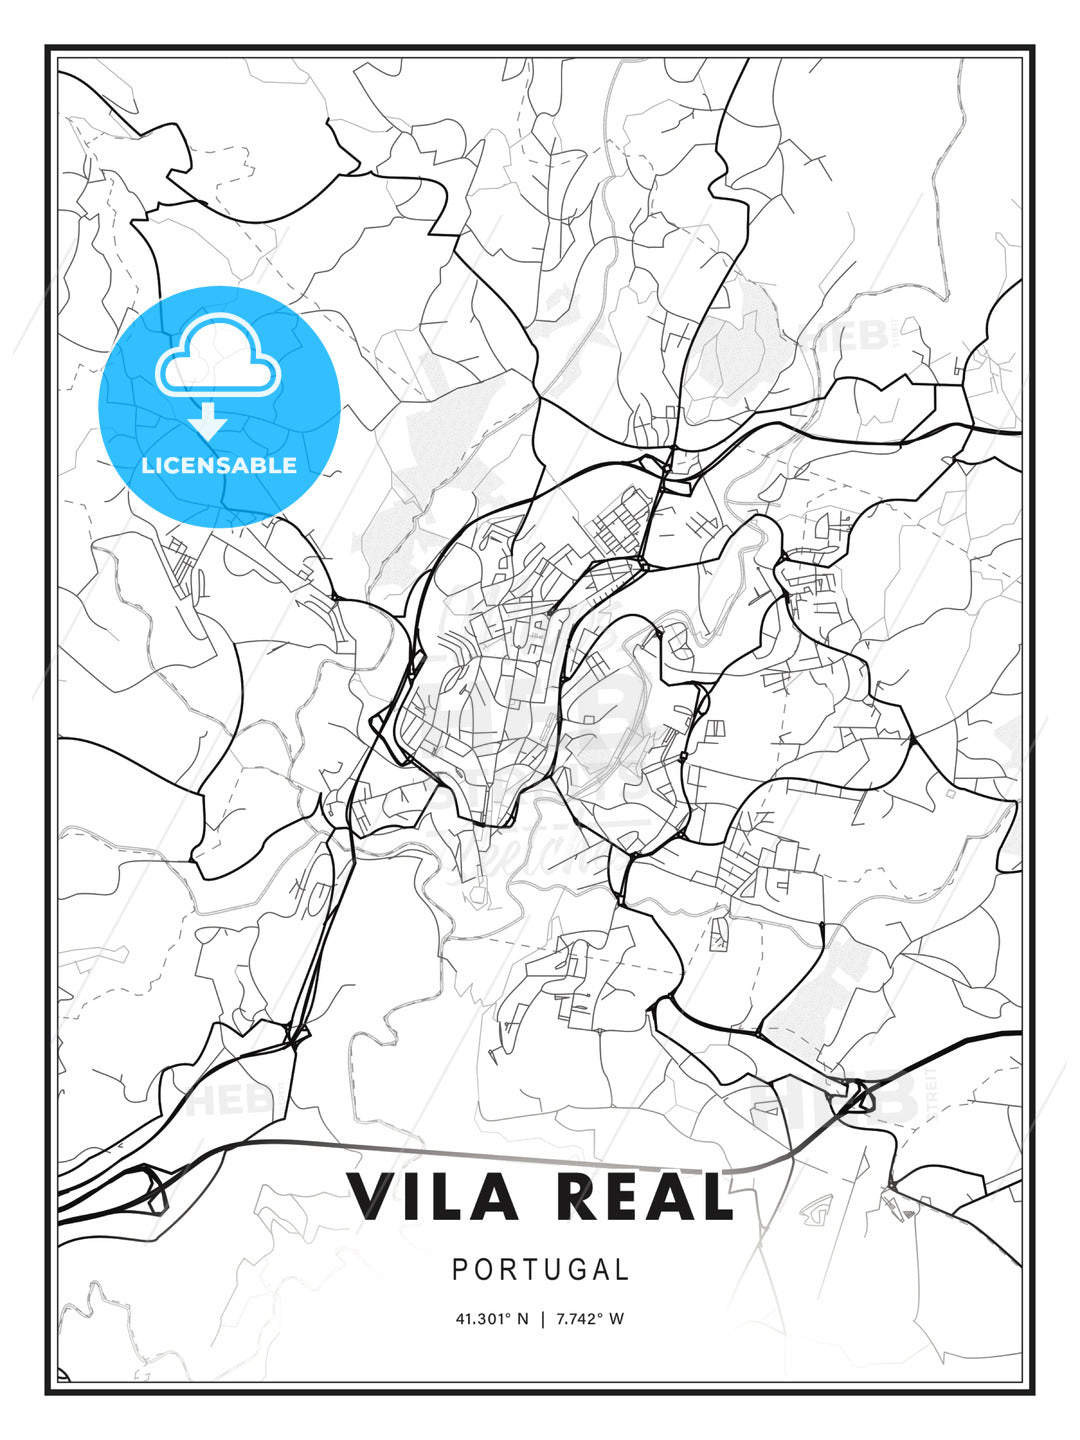 Vila Real, Portugal, Modern Print Template in Various Formats - HEBSTREITS Sketches